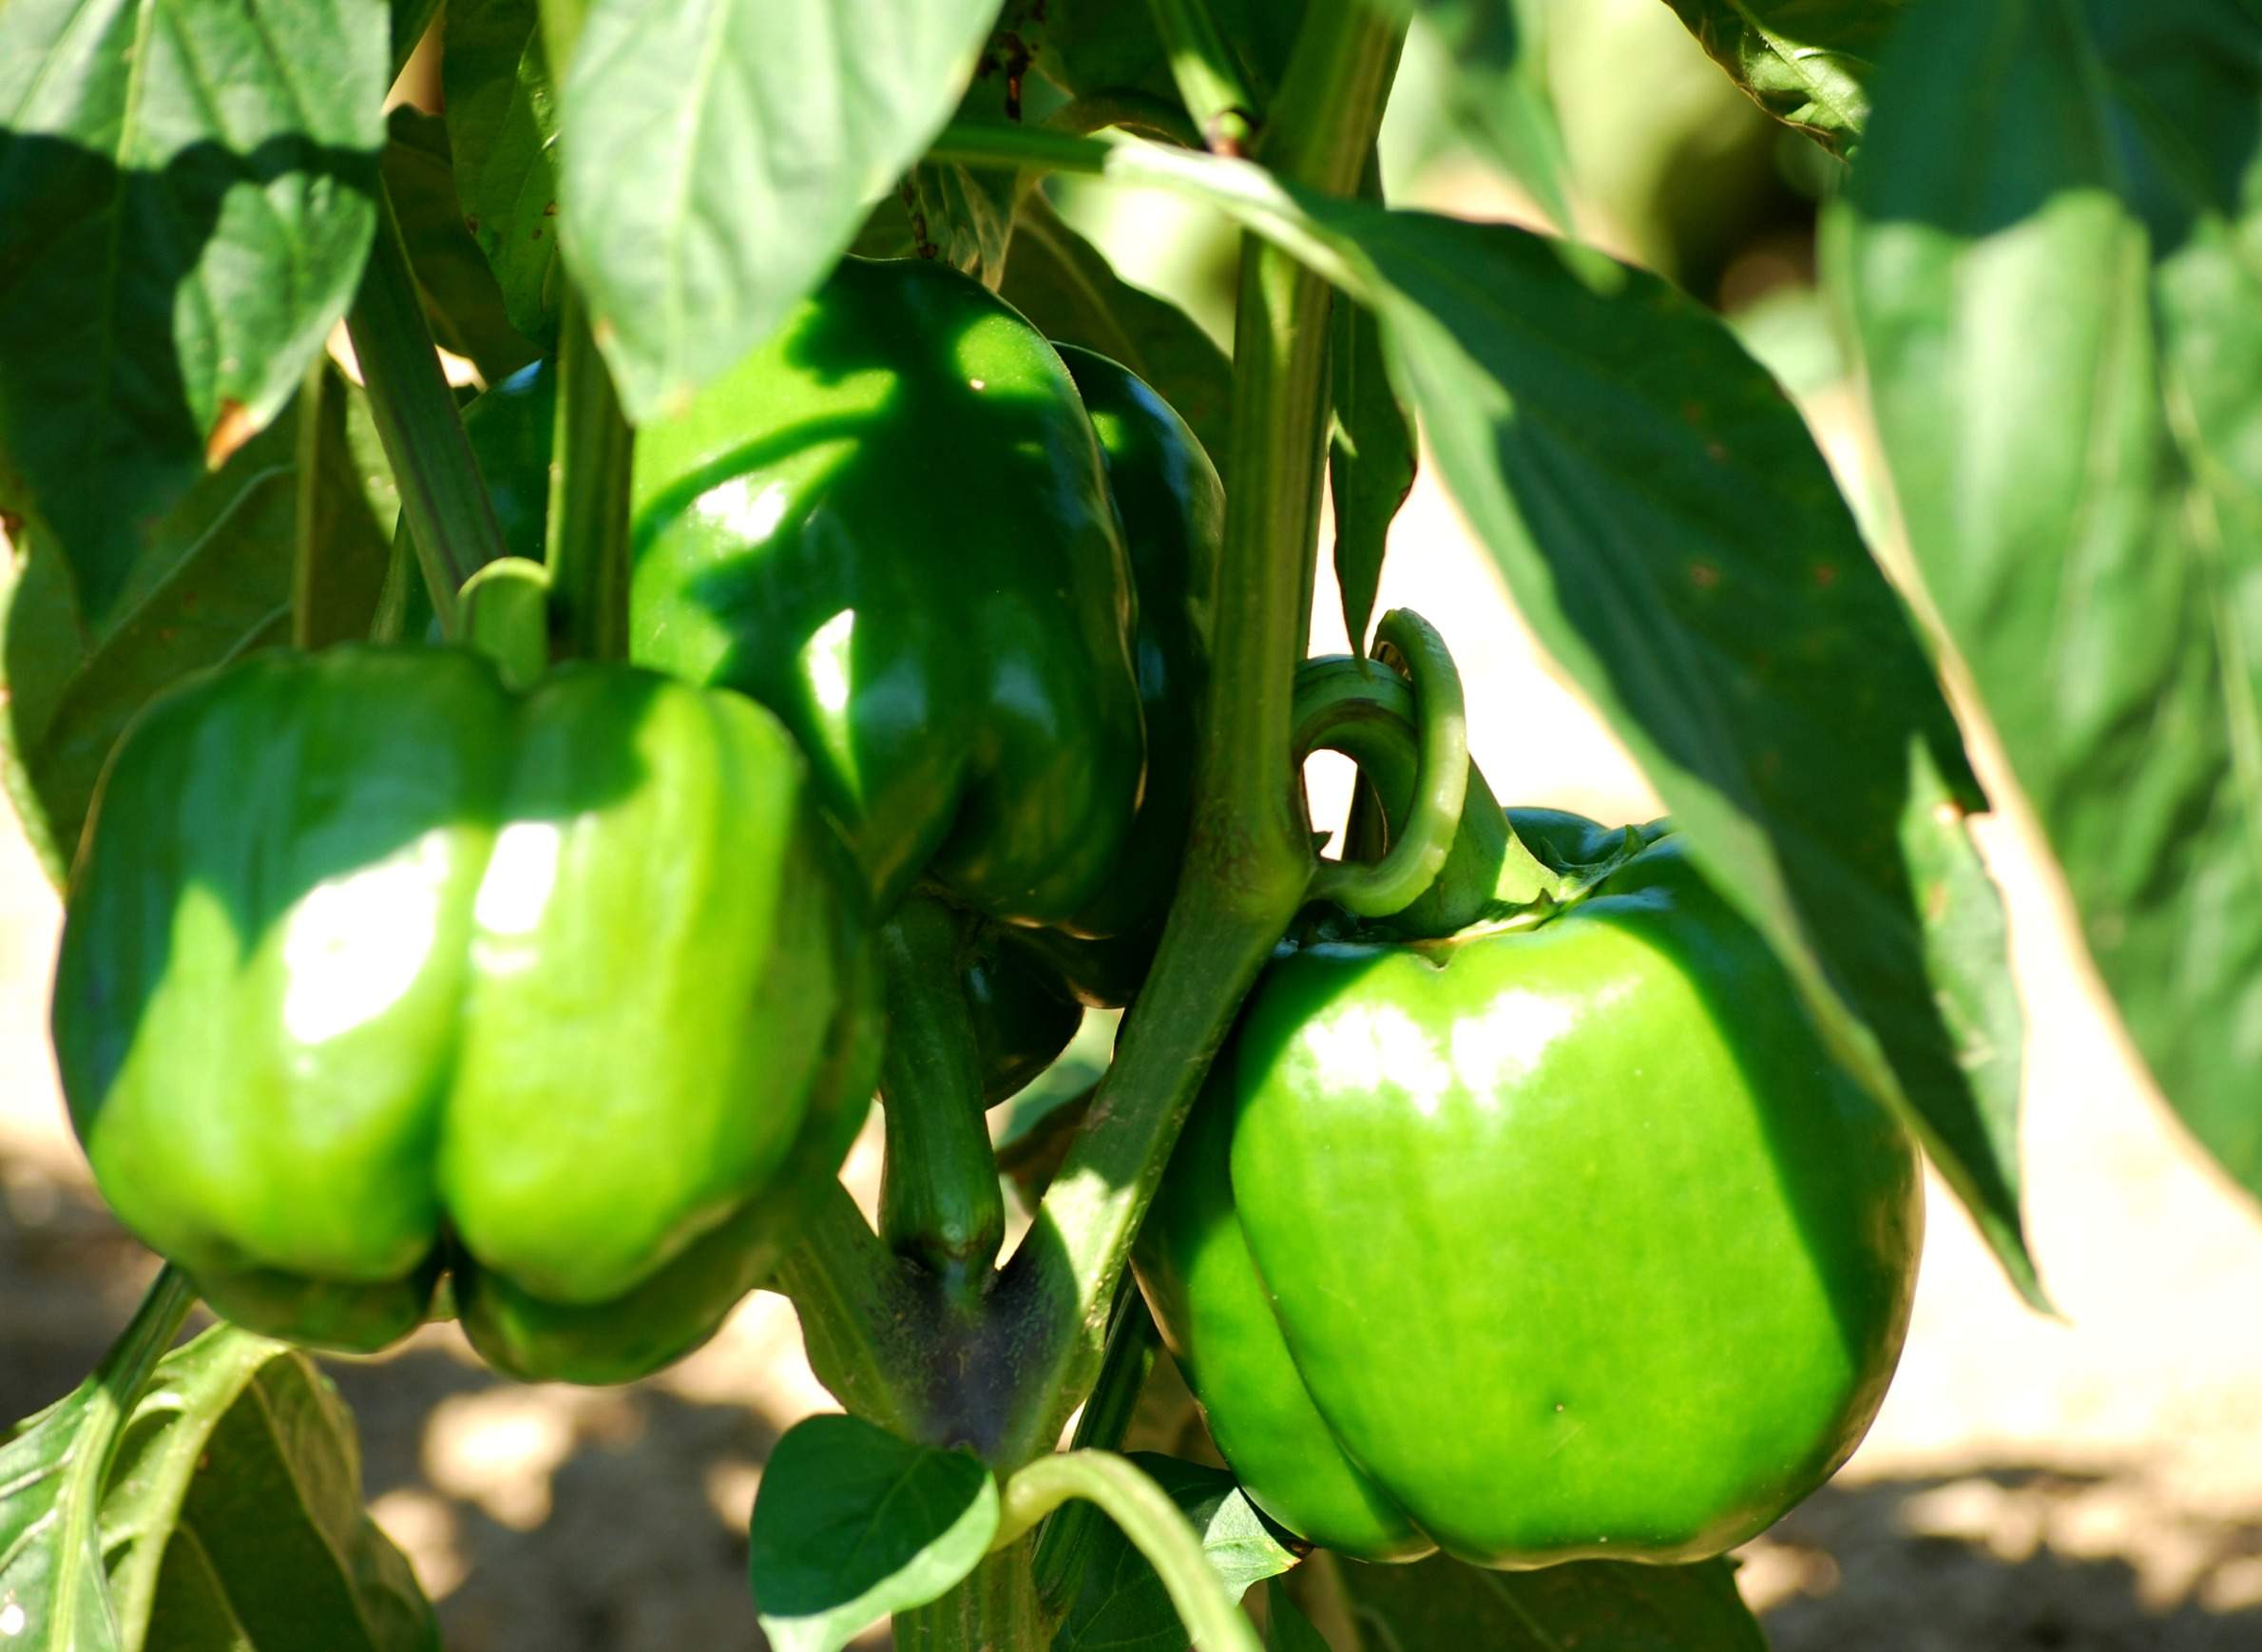 Green peppers hang on the vine in a Wisconsin garden